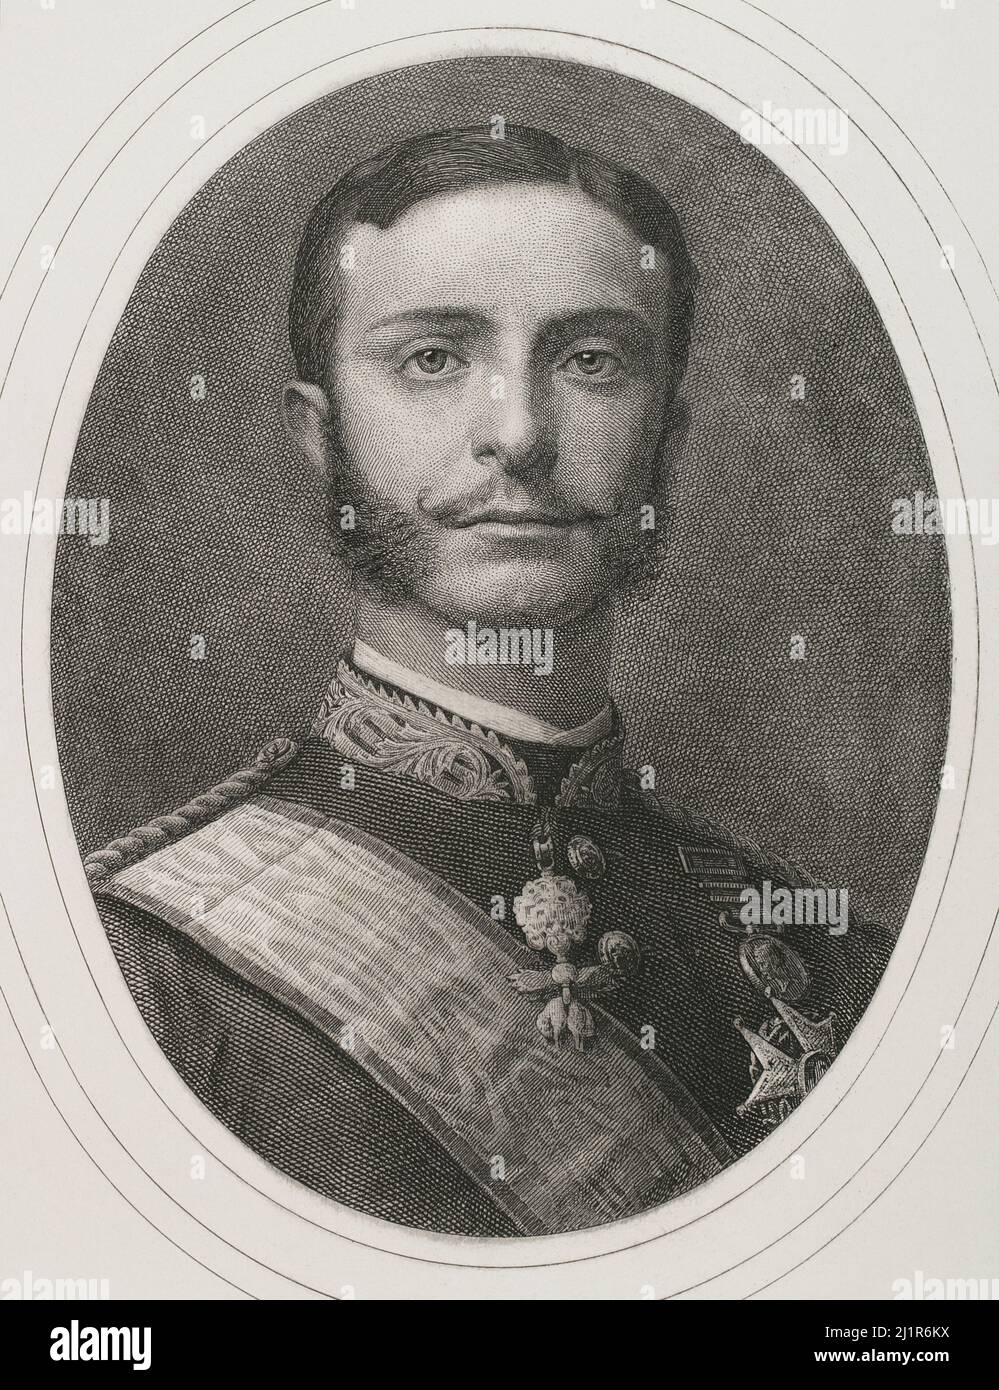 Alfonso XII (Madrid, 1857-Madrid, 1885). King of Spain (1874-1885). Portrait. Engraving by Bartolomé Maura. Historia General de España, by Modesto Lafuente. Volume VI. Published in Barcelona, 1882. Stock Photo